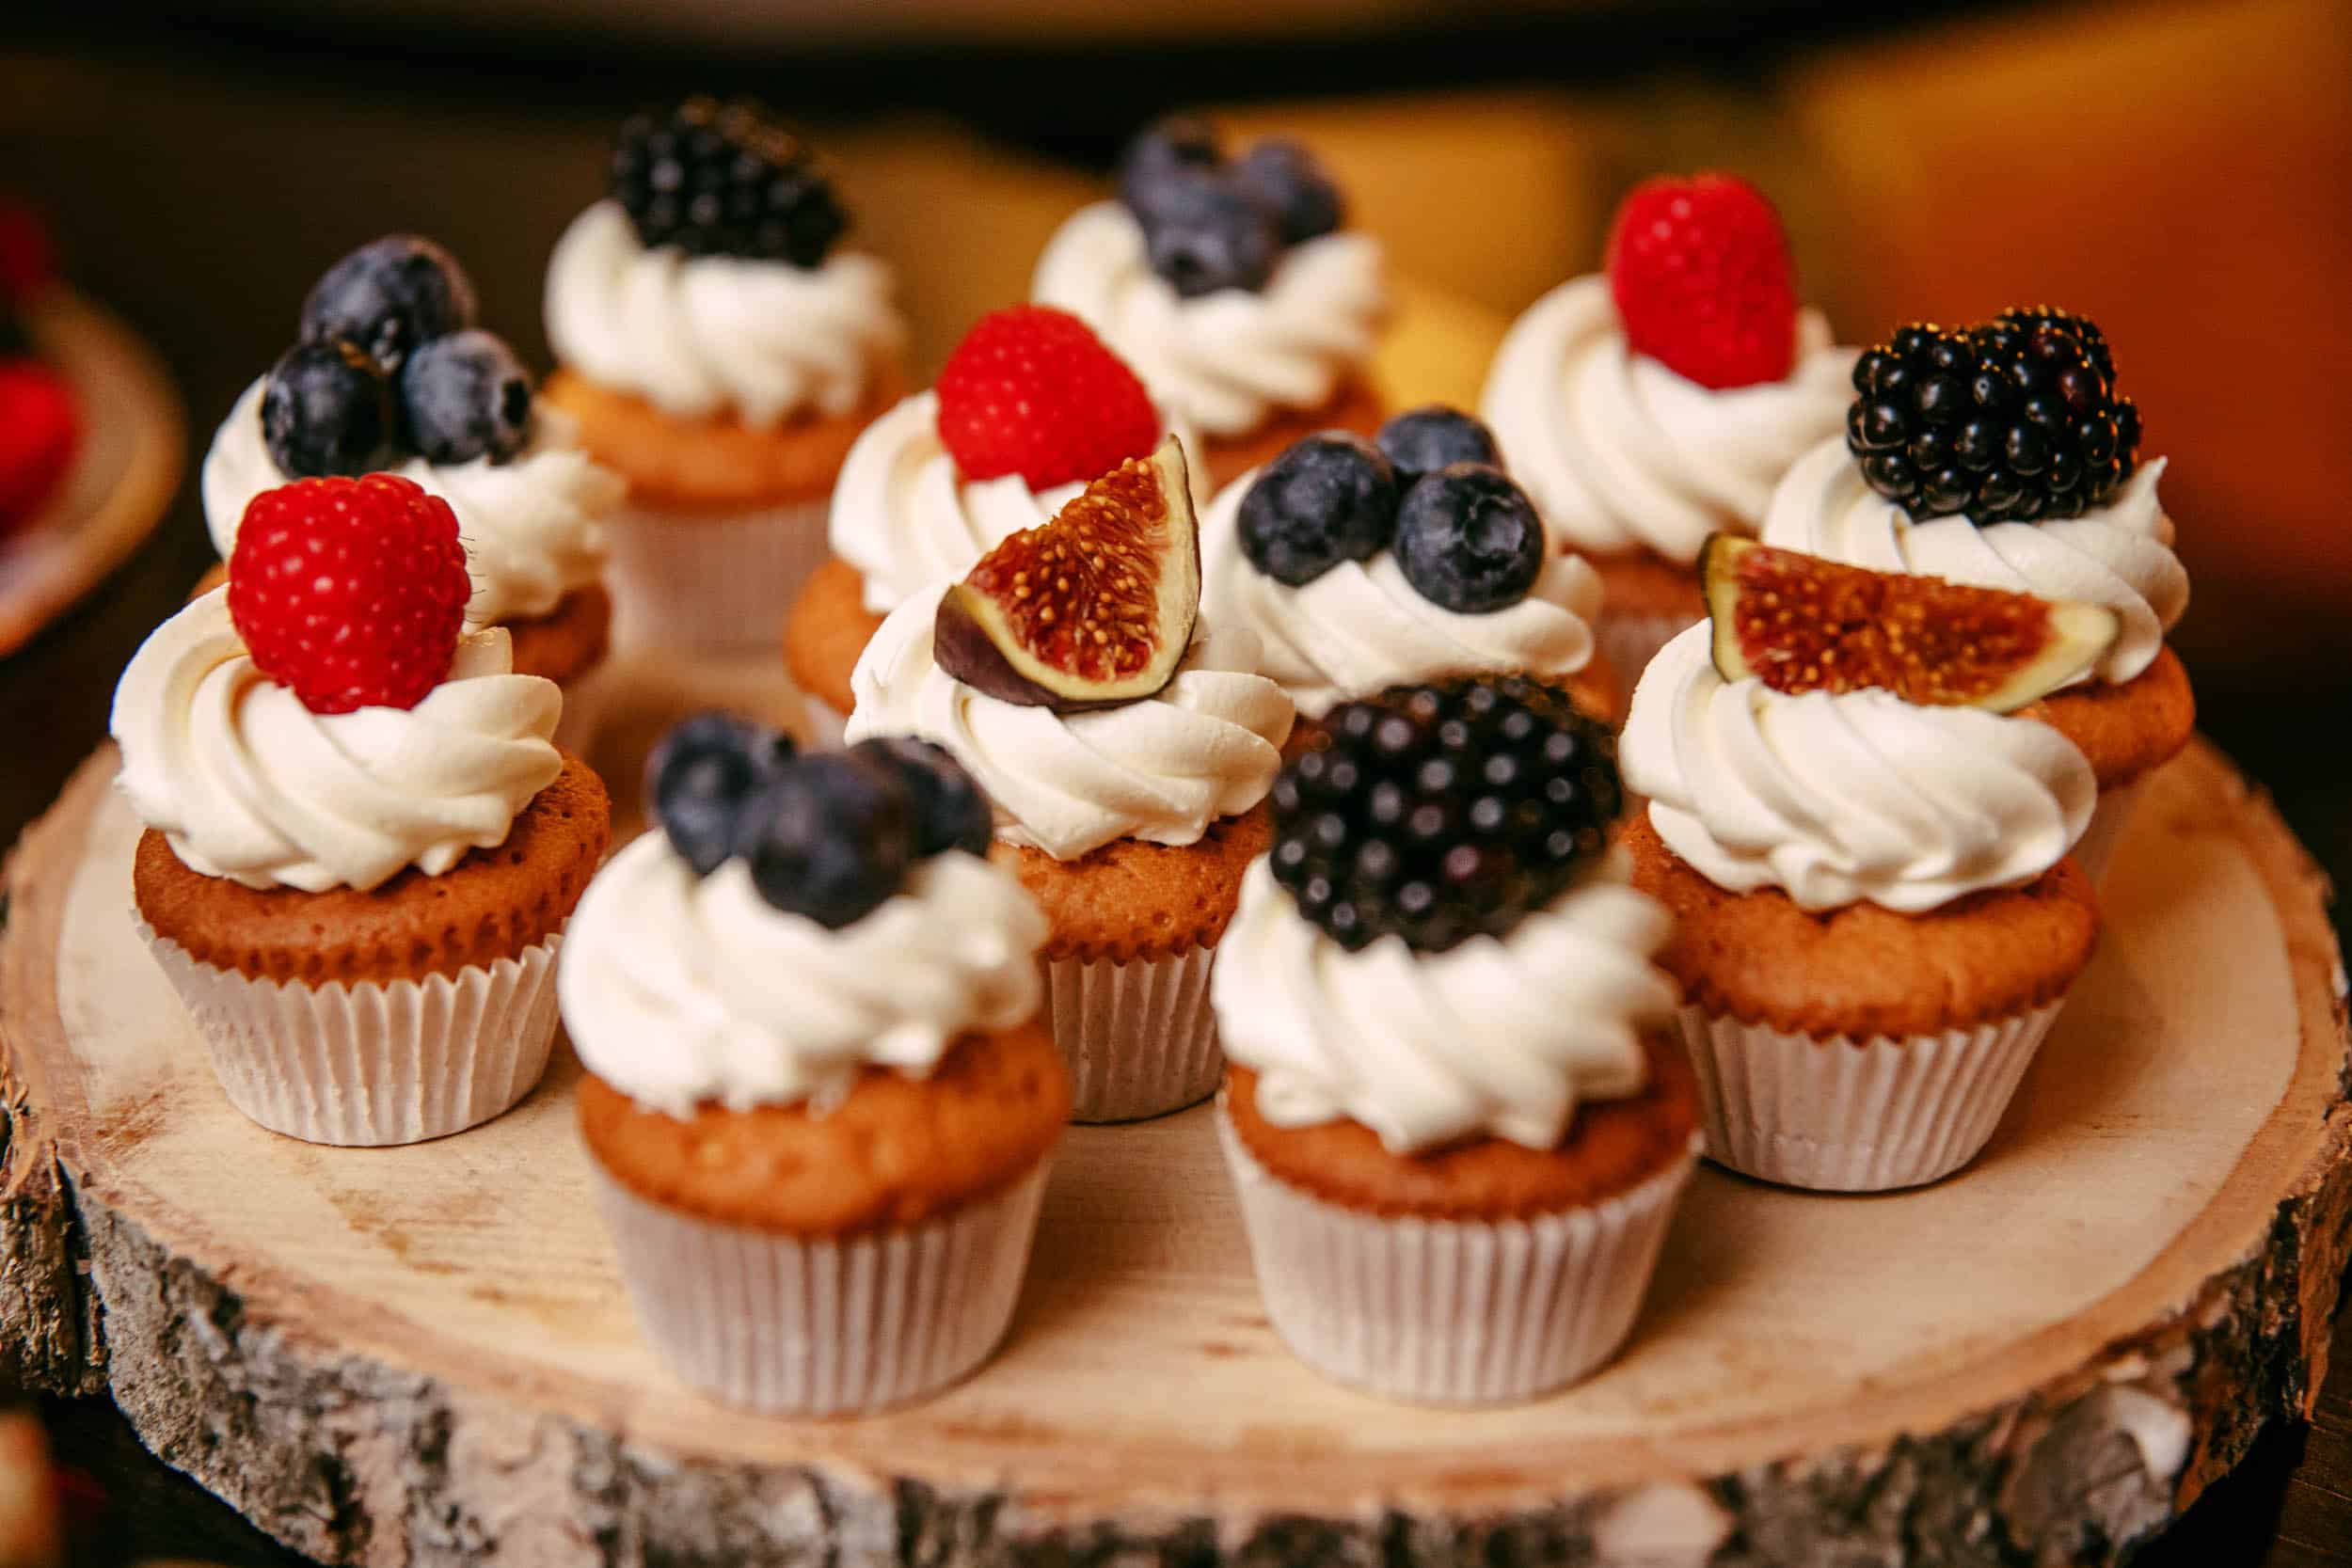 Cupcakes garnished with berries and whipped cream, perfect for a wedding theme.